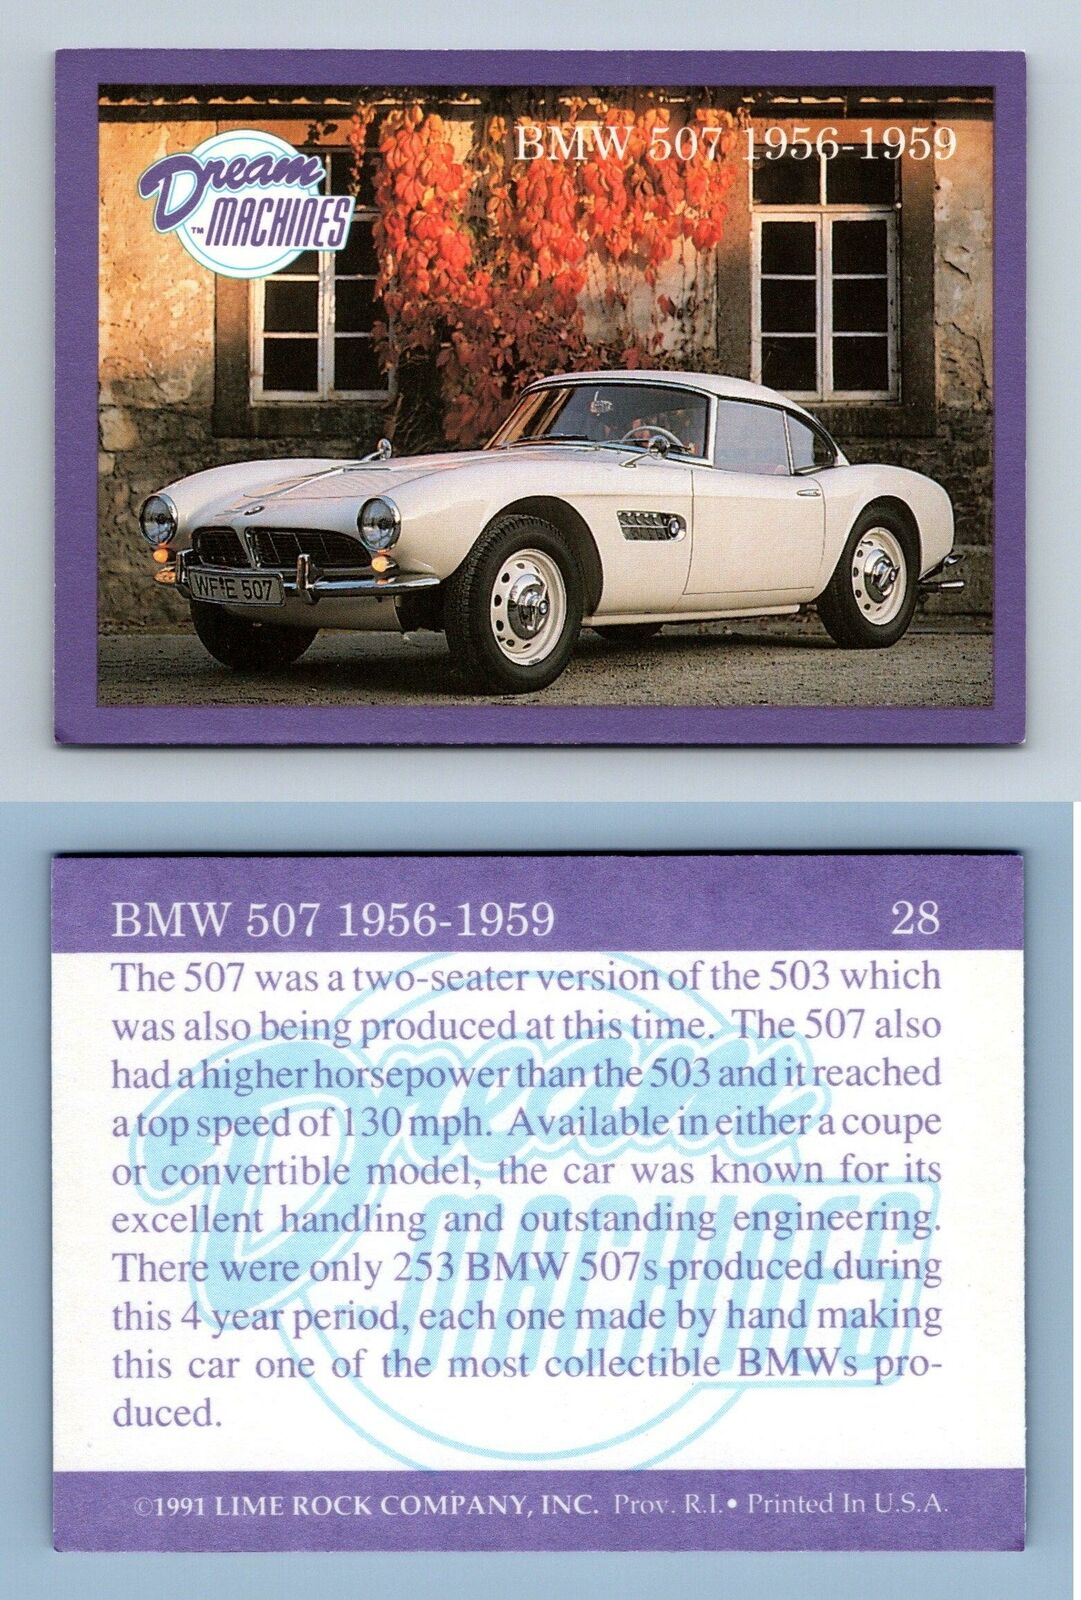 1956-1959 BMW 507 #28 - Dream Machines 1991 Lime Rock Trading Card